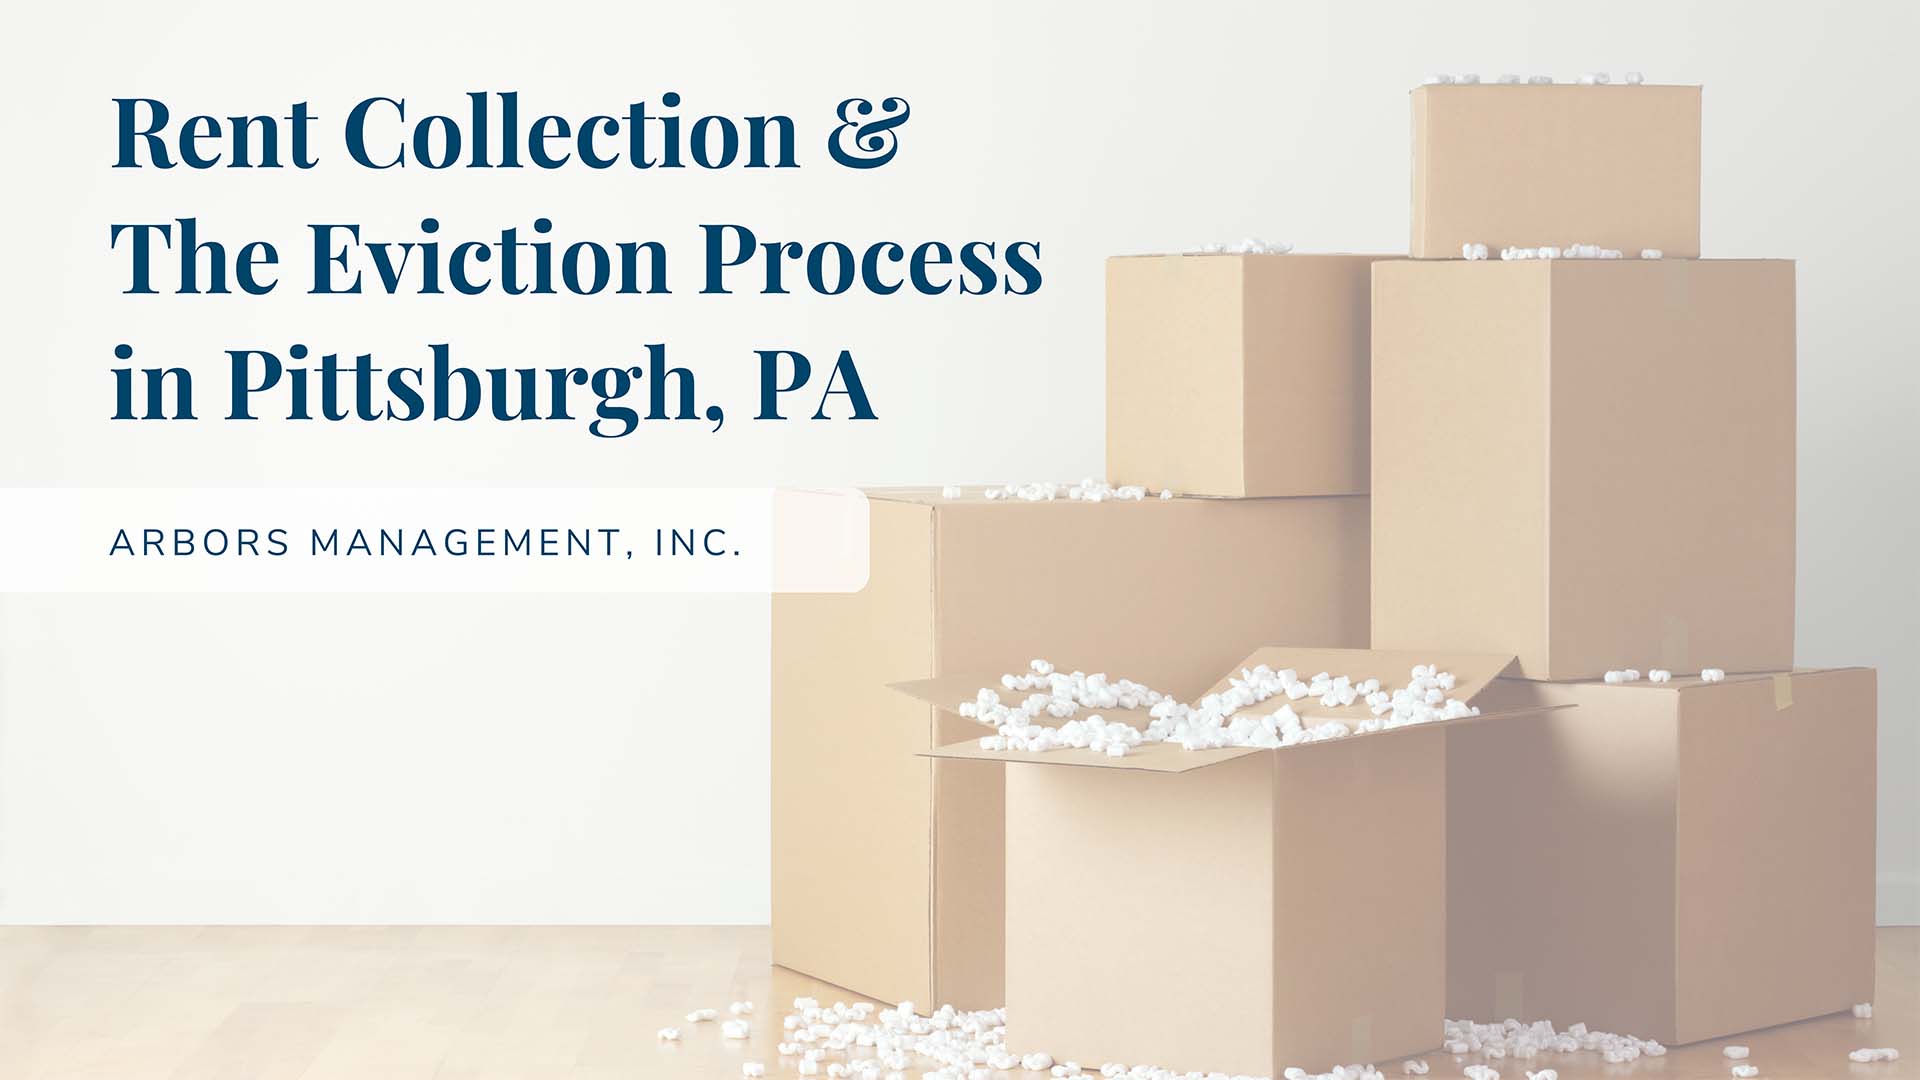 Rent Collection & The Eviction Process in Pittsburgh